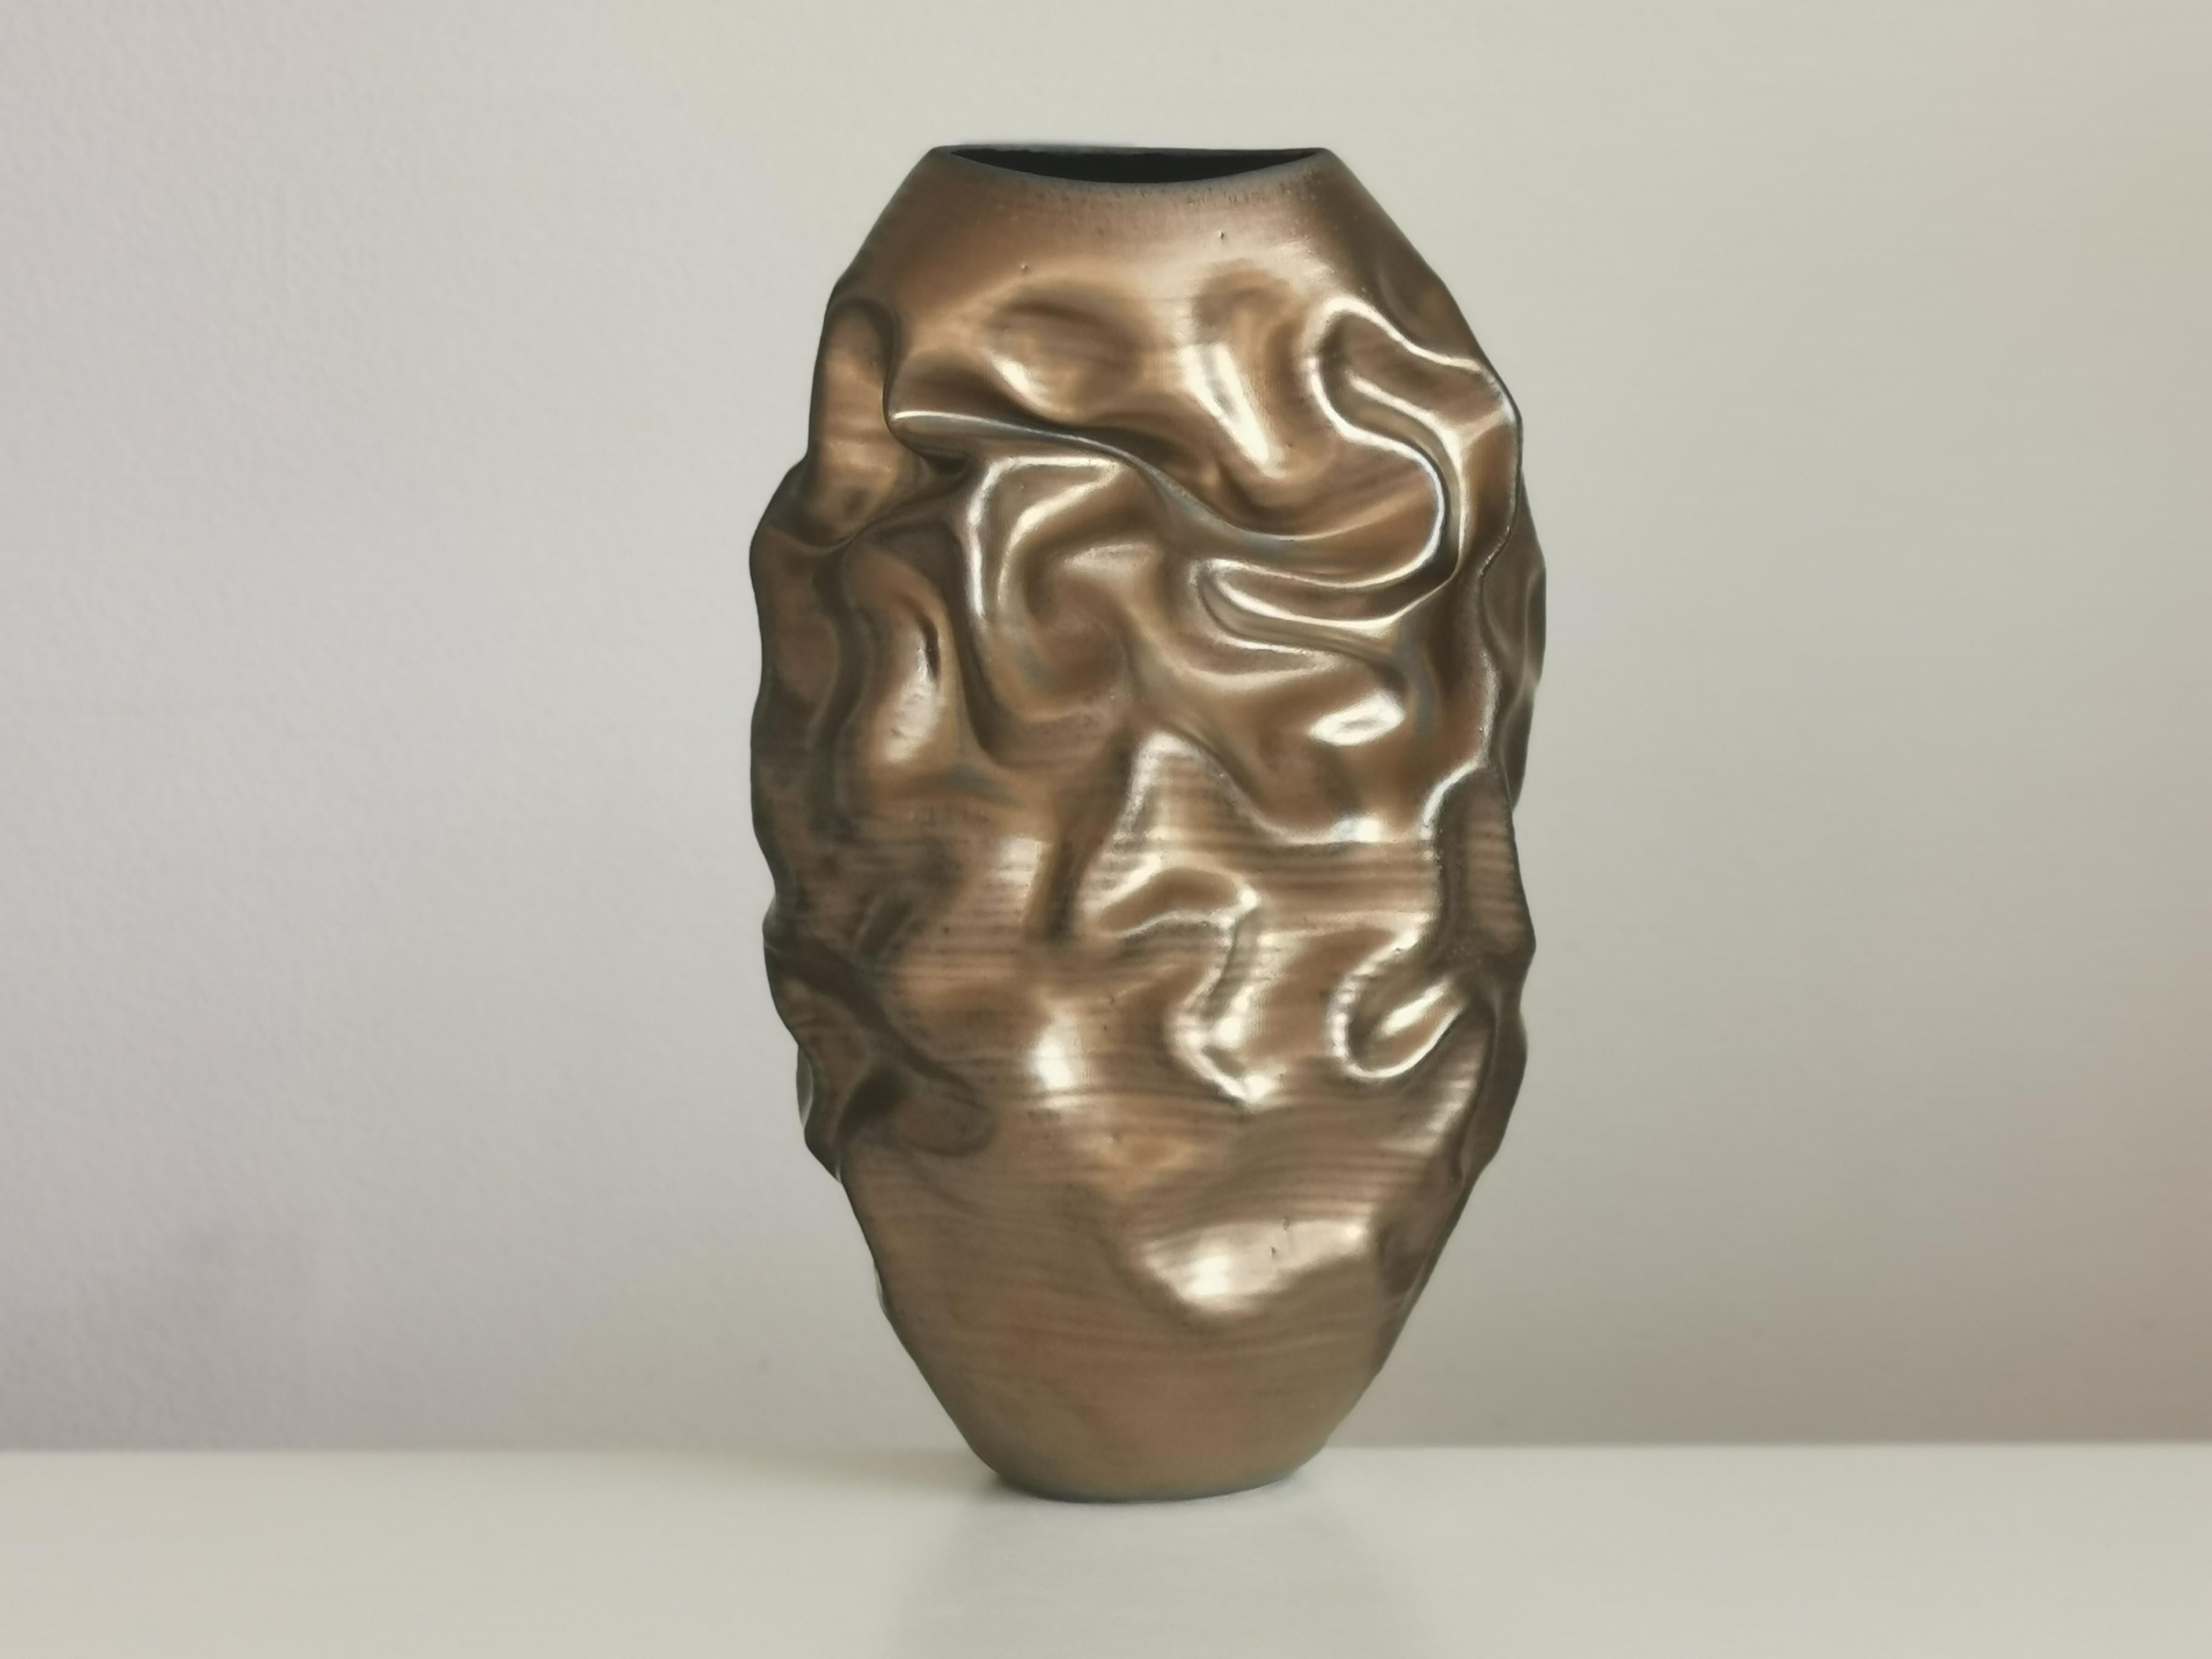 Sculpture vessel N.86. sumptuous ceramic sculpture from ceramic artist Nicholas Arroyave-Portela. Made in 2022.

White St.Thomas clay, stoneware glazes, multi fired to cone 6 (1223 degrees)

Measures: 44 cm tall, 24 cm wide, 22 cm deep

The